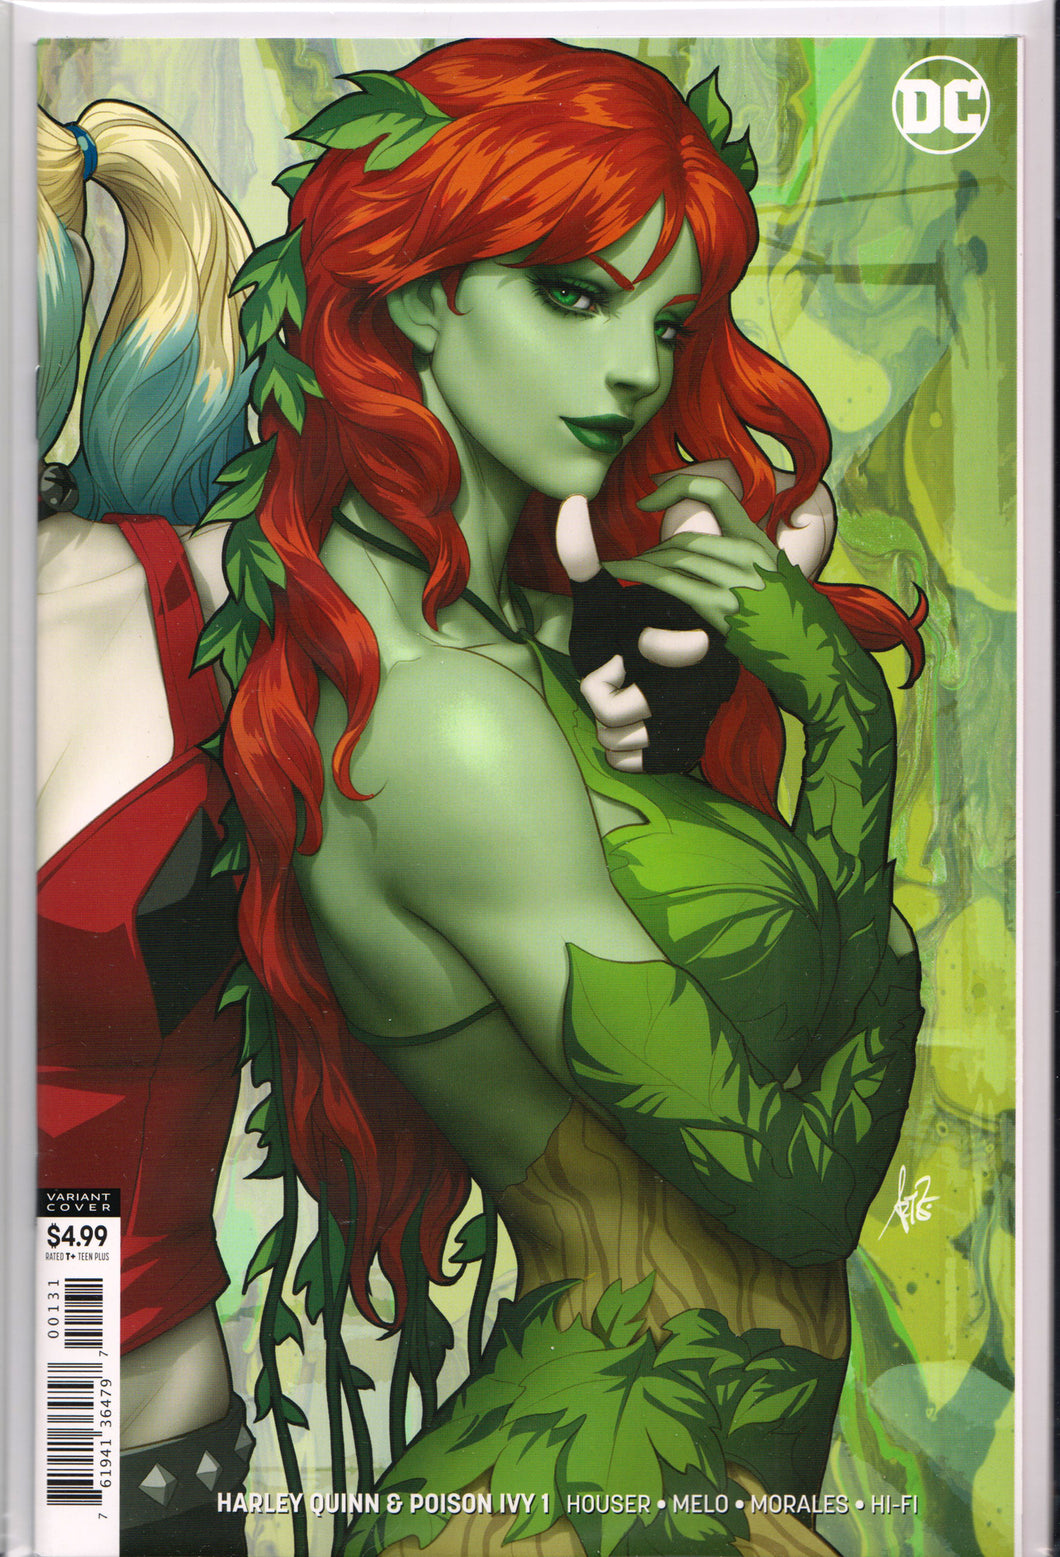 HARLEY QUINN & POISON IVY #1 (POISON IVY VARIANT COVER BY ARTGERM) ~ DC Comics